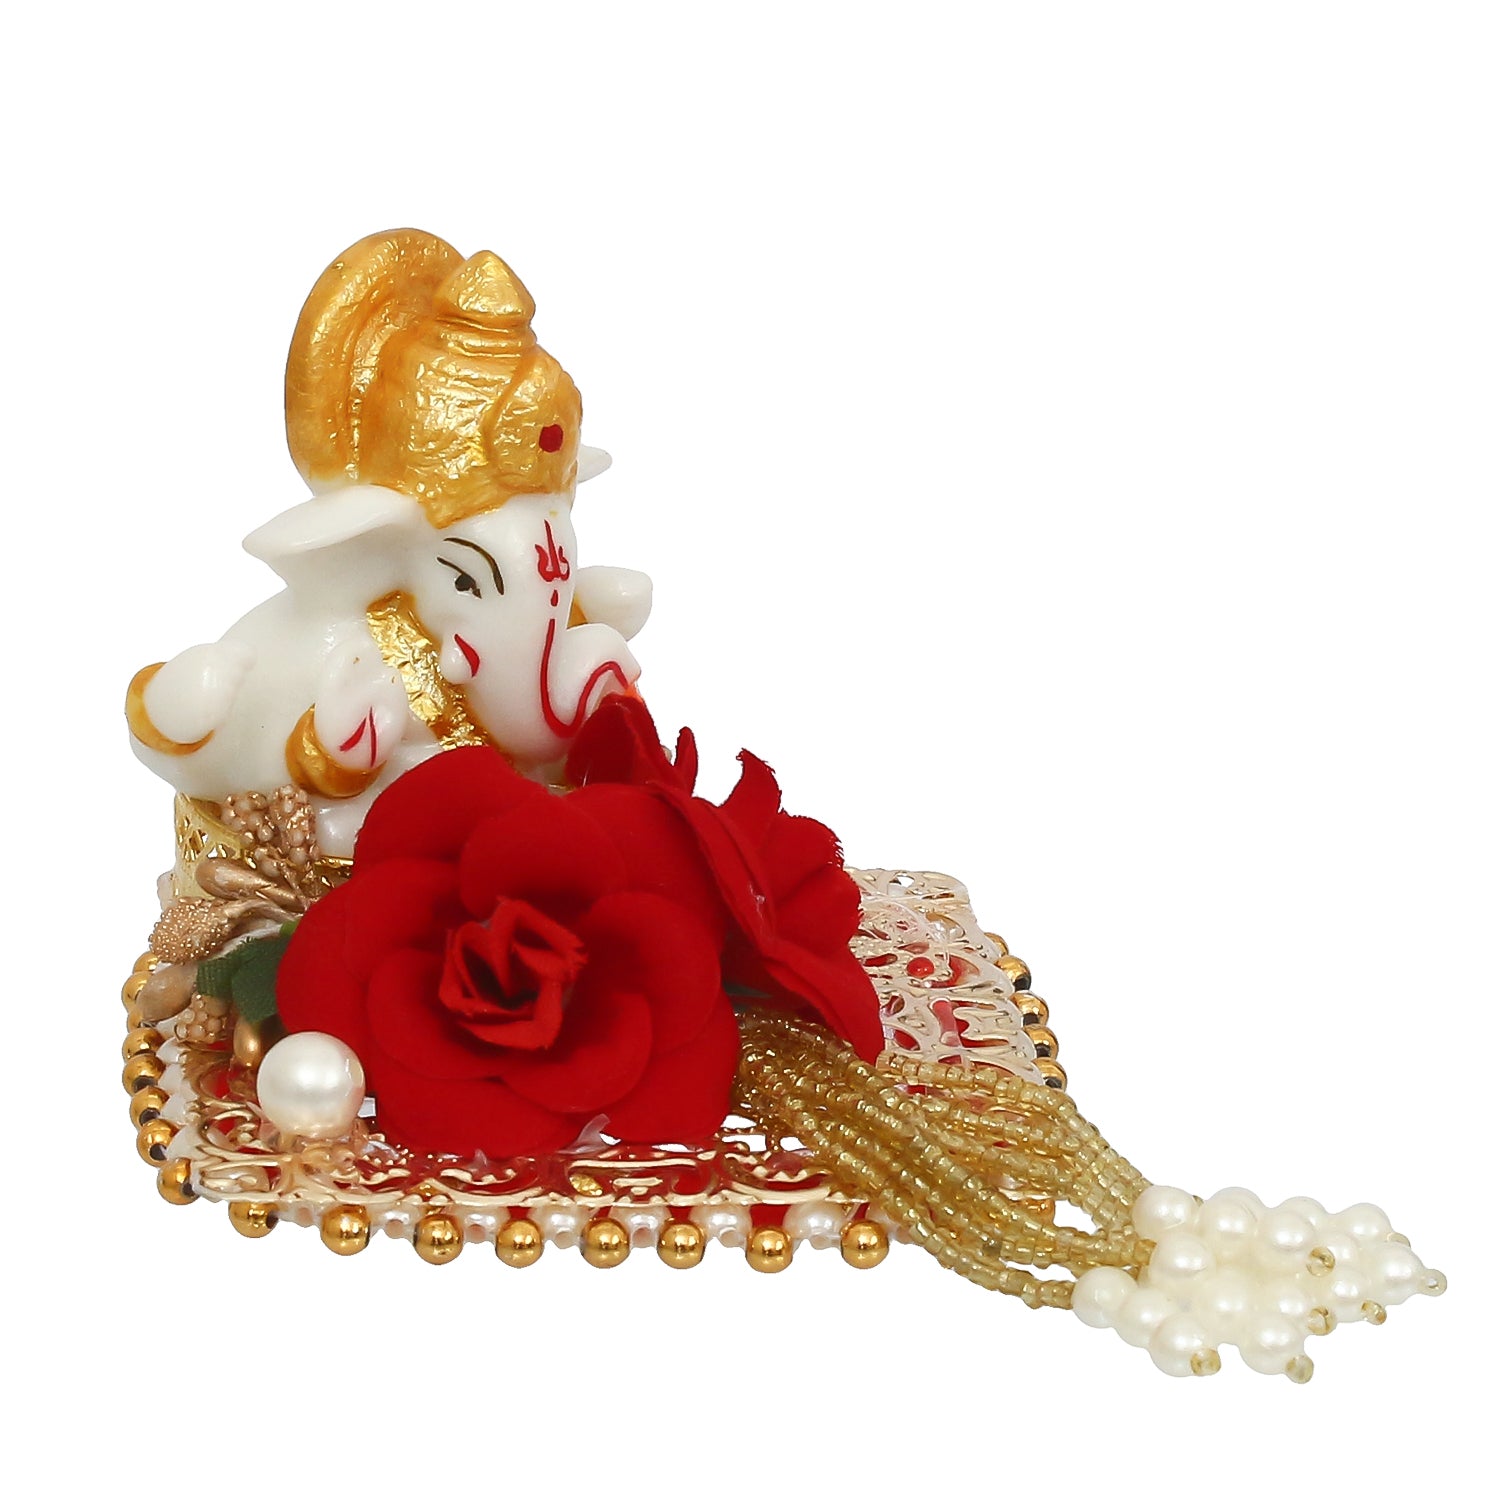 Polyresin Lord Ganesha Idol on Decorative Handcrafted Plate for Home and Car Dashboard 3